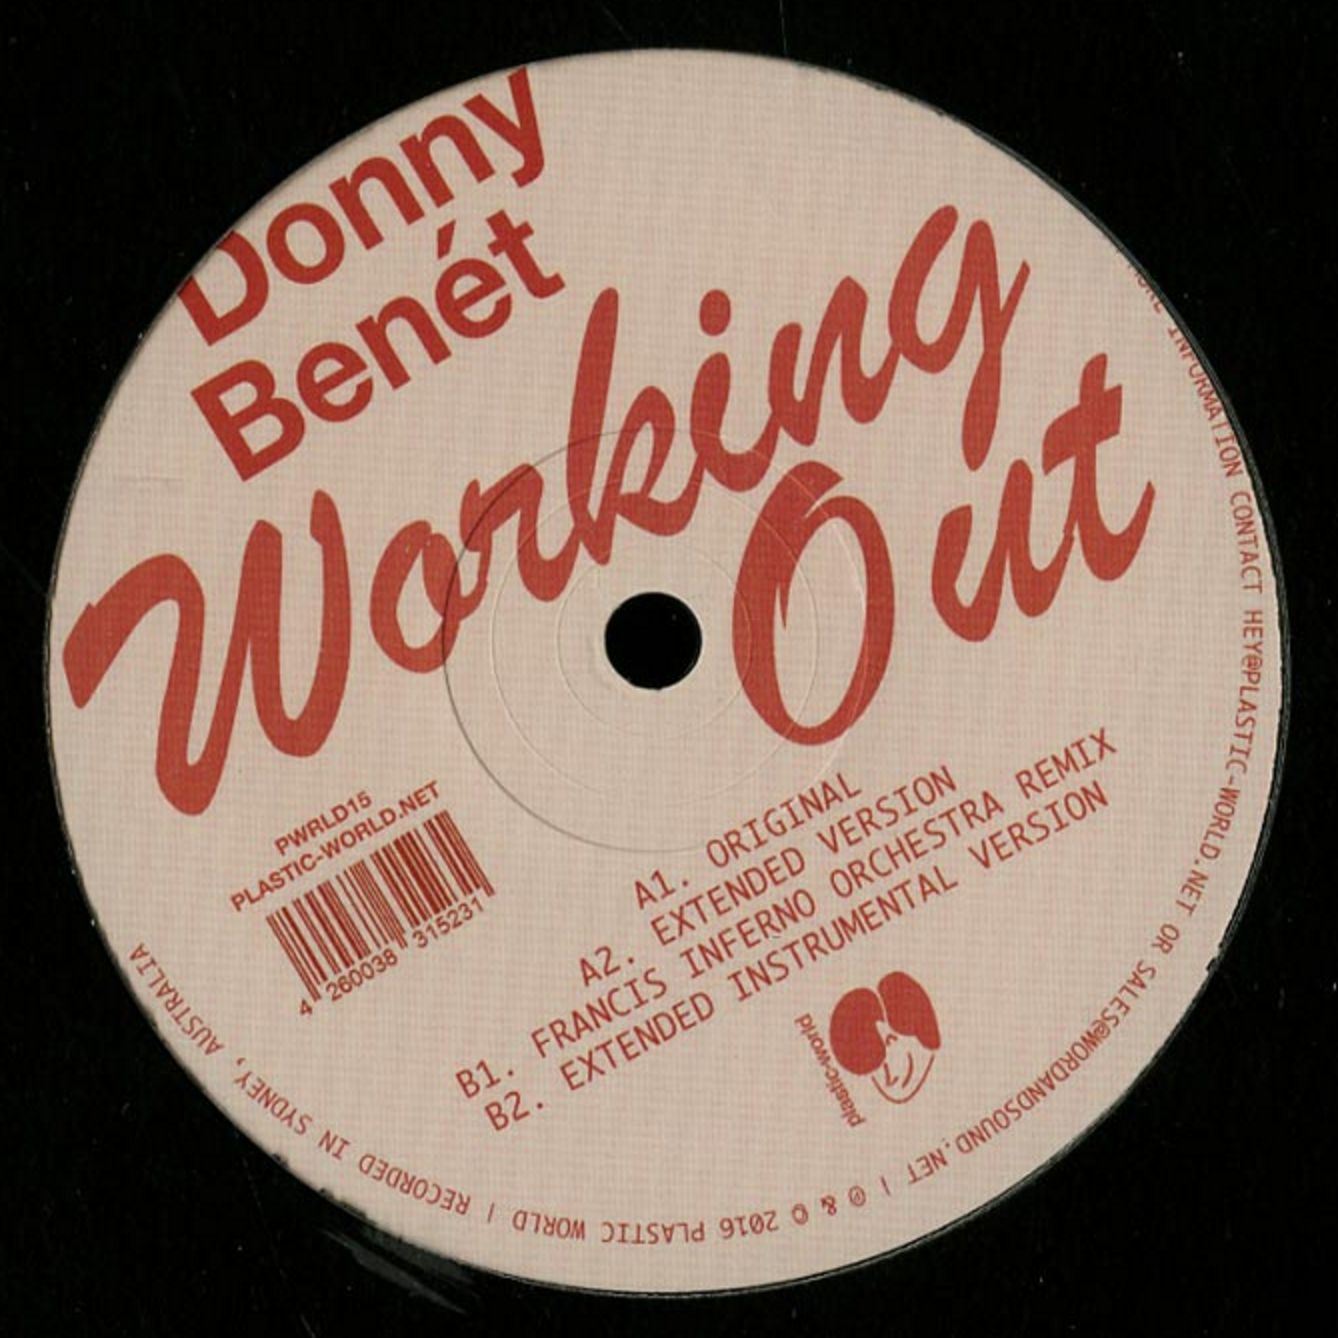 Khuphela Donny Benet - Working Out (FIO's Yarra Bend Reprise)